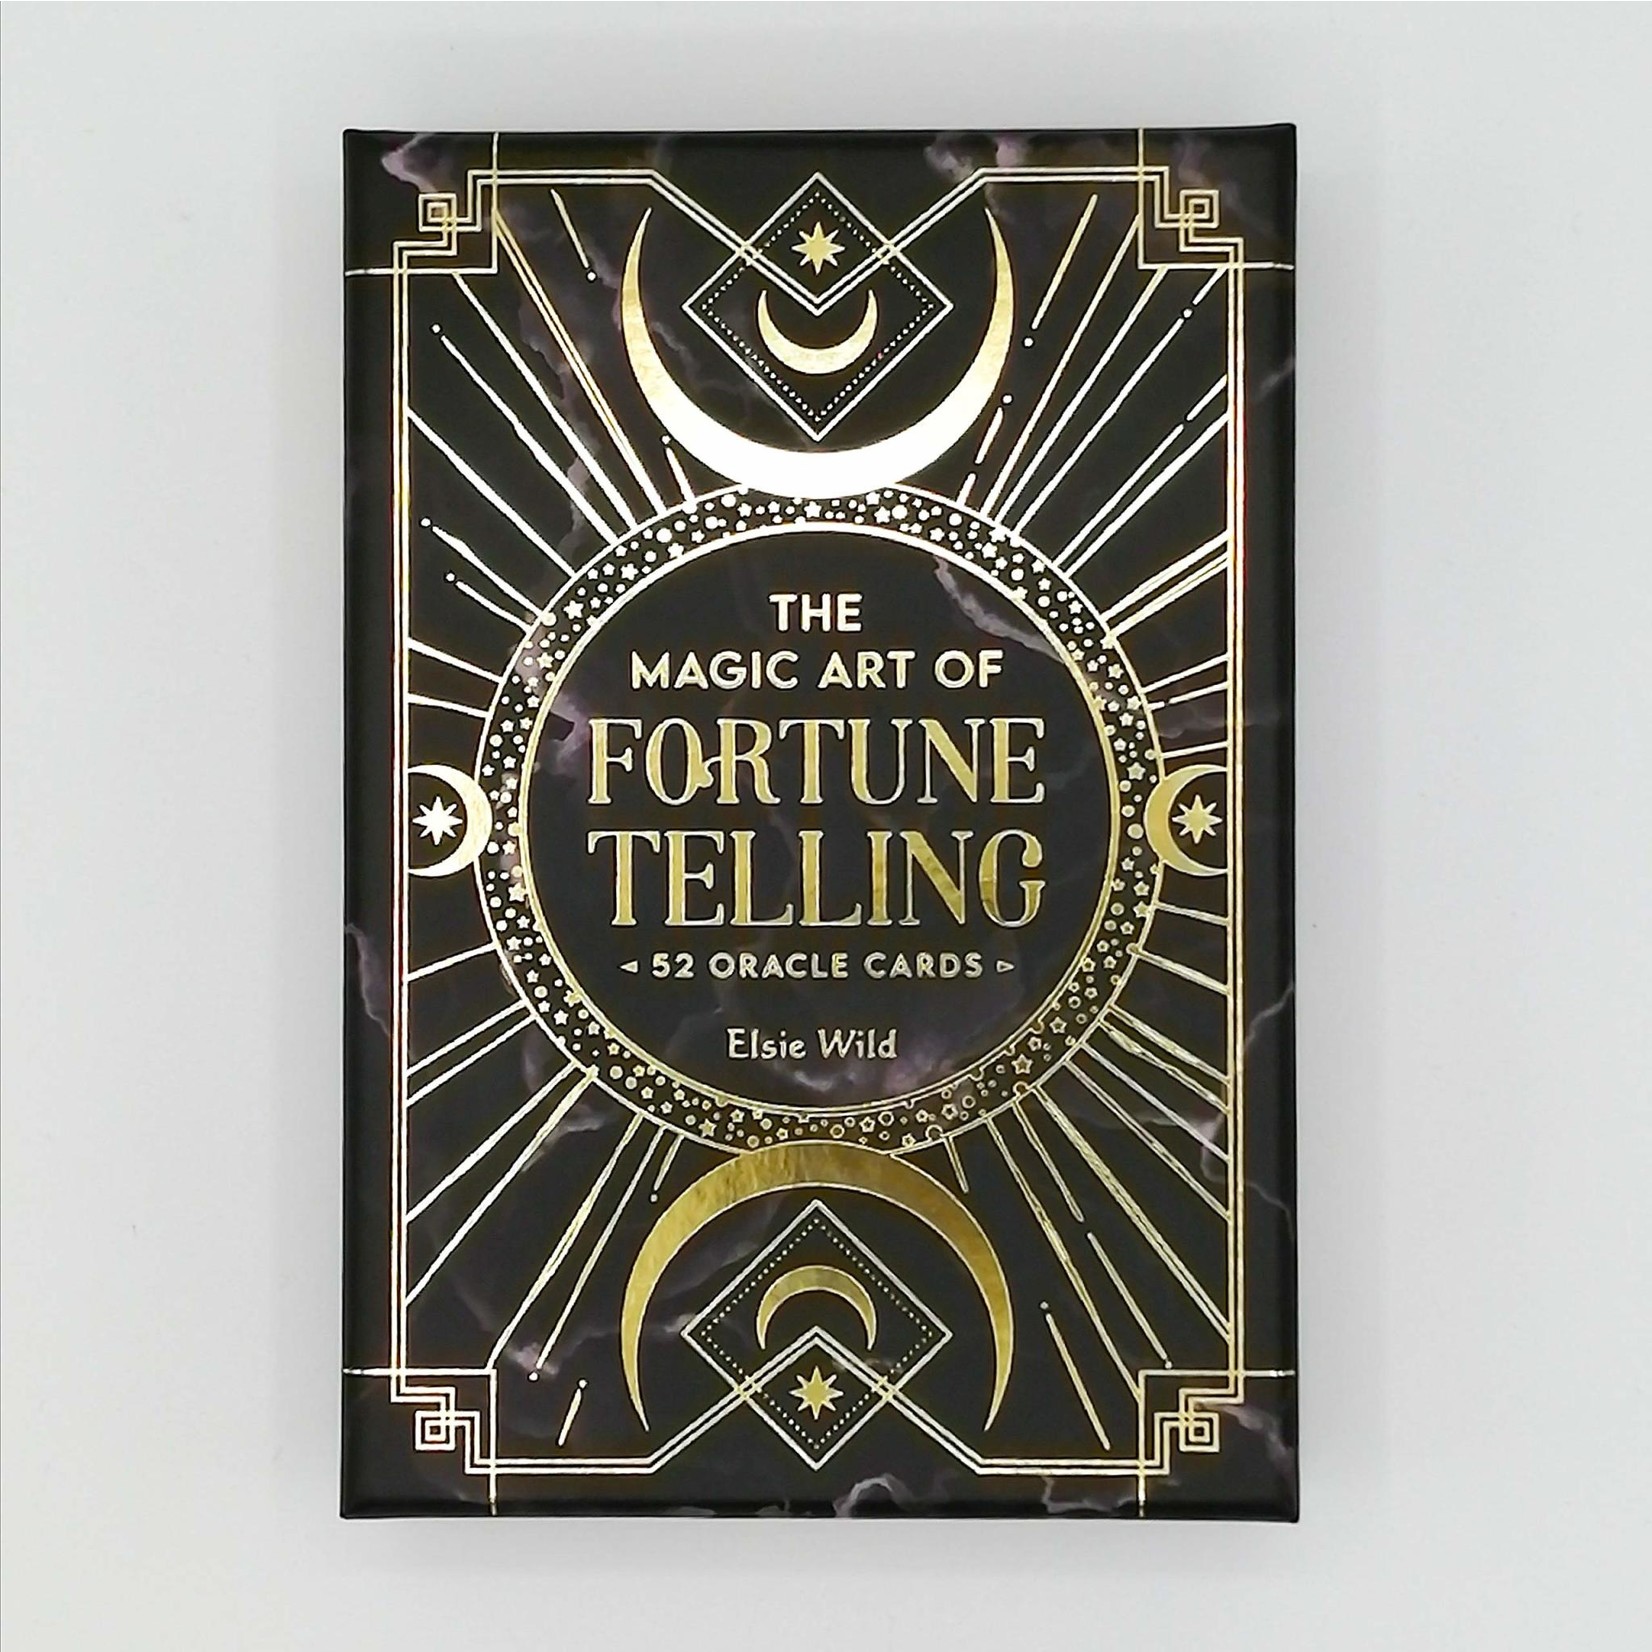 The Magic Art of Fortune Telling - 52 Oracle Cards